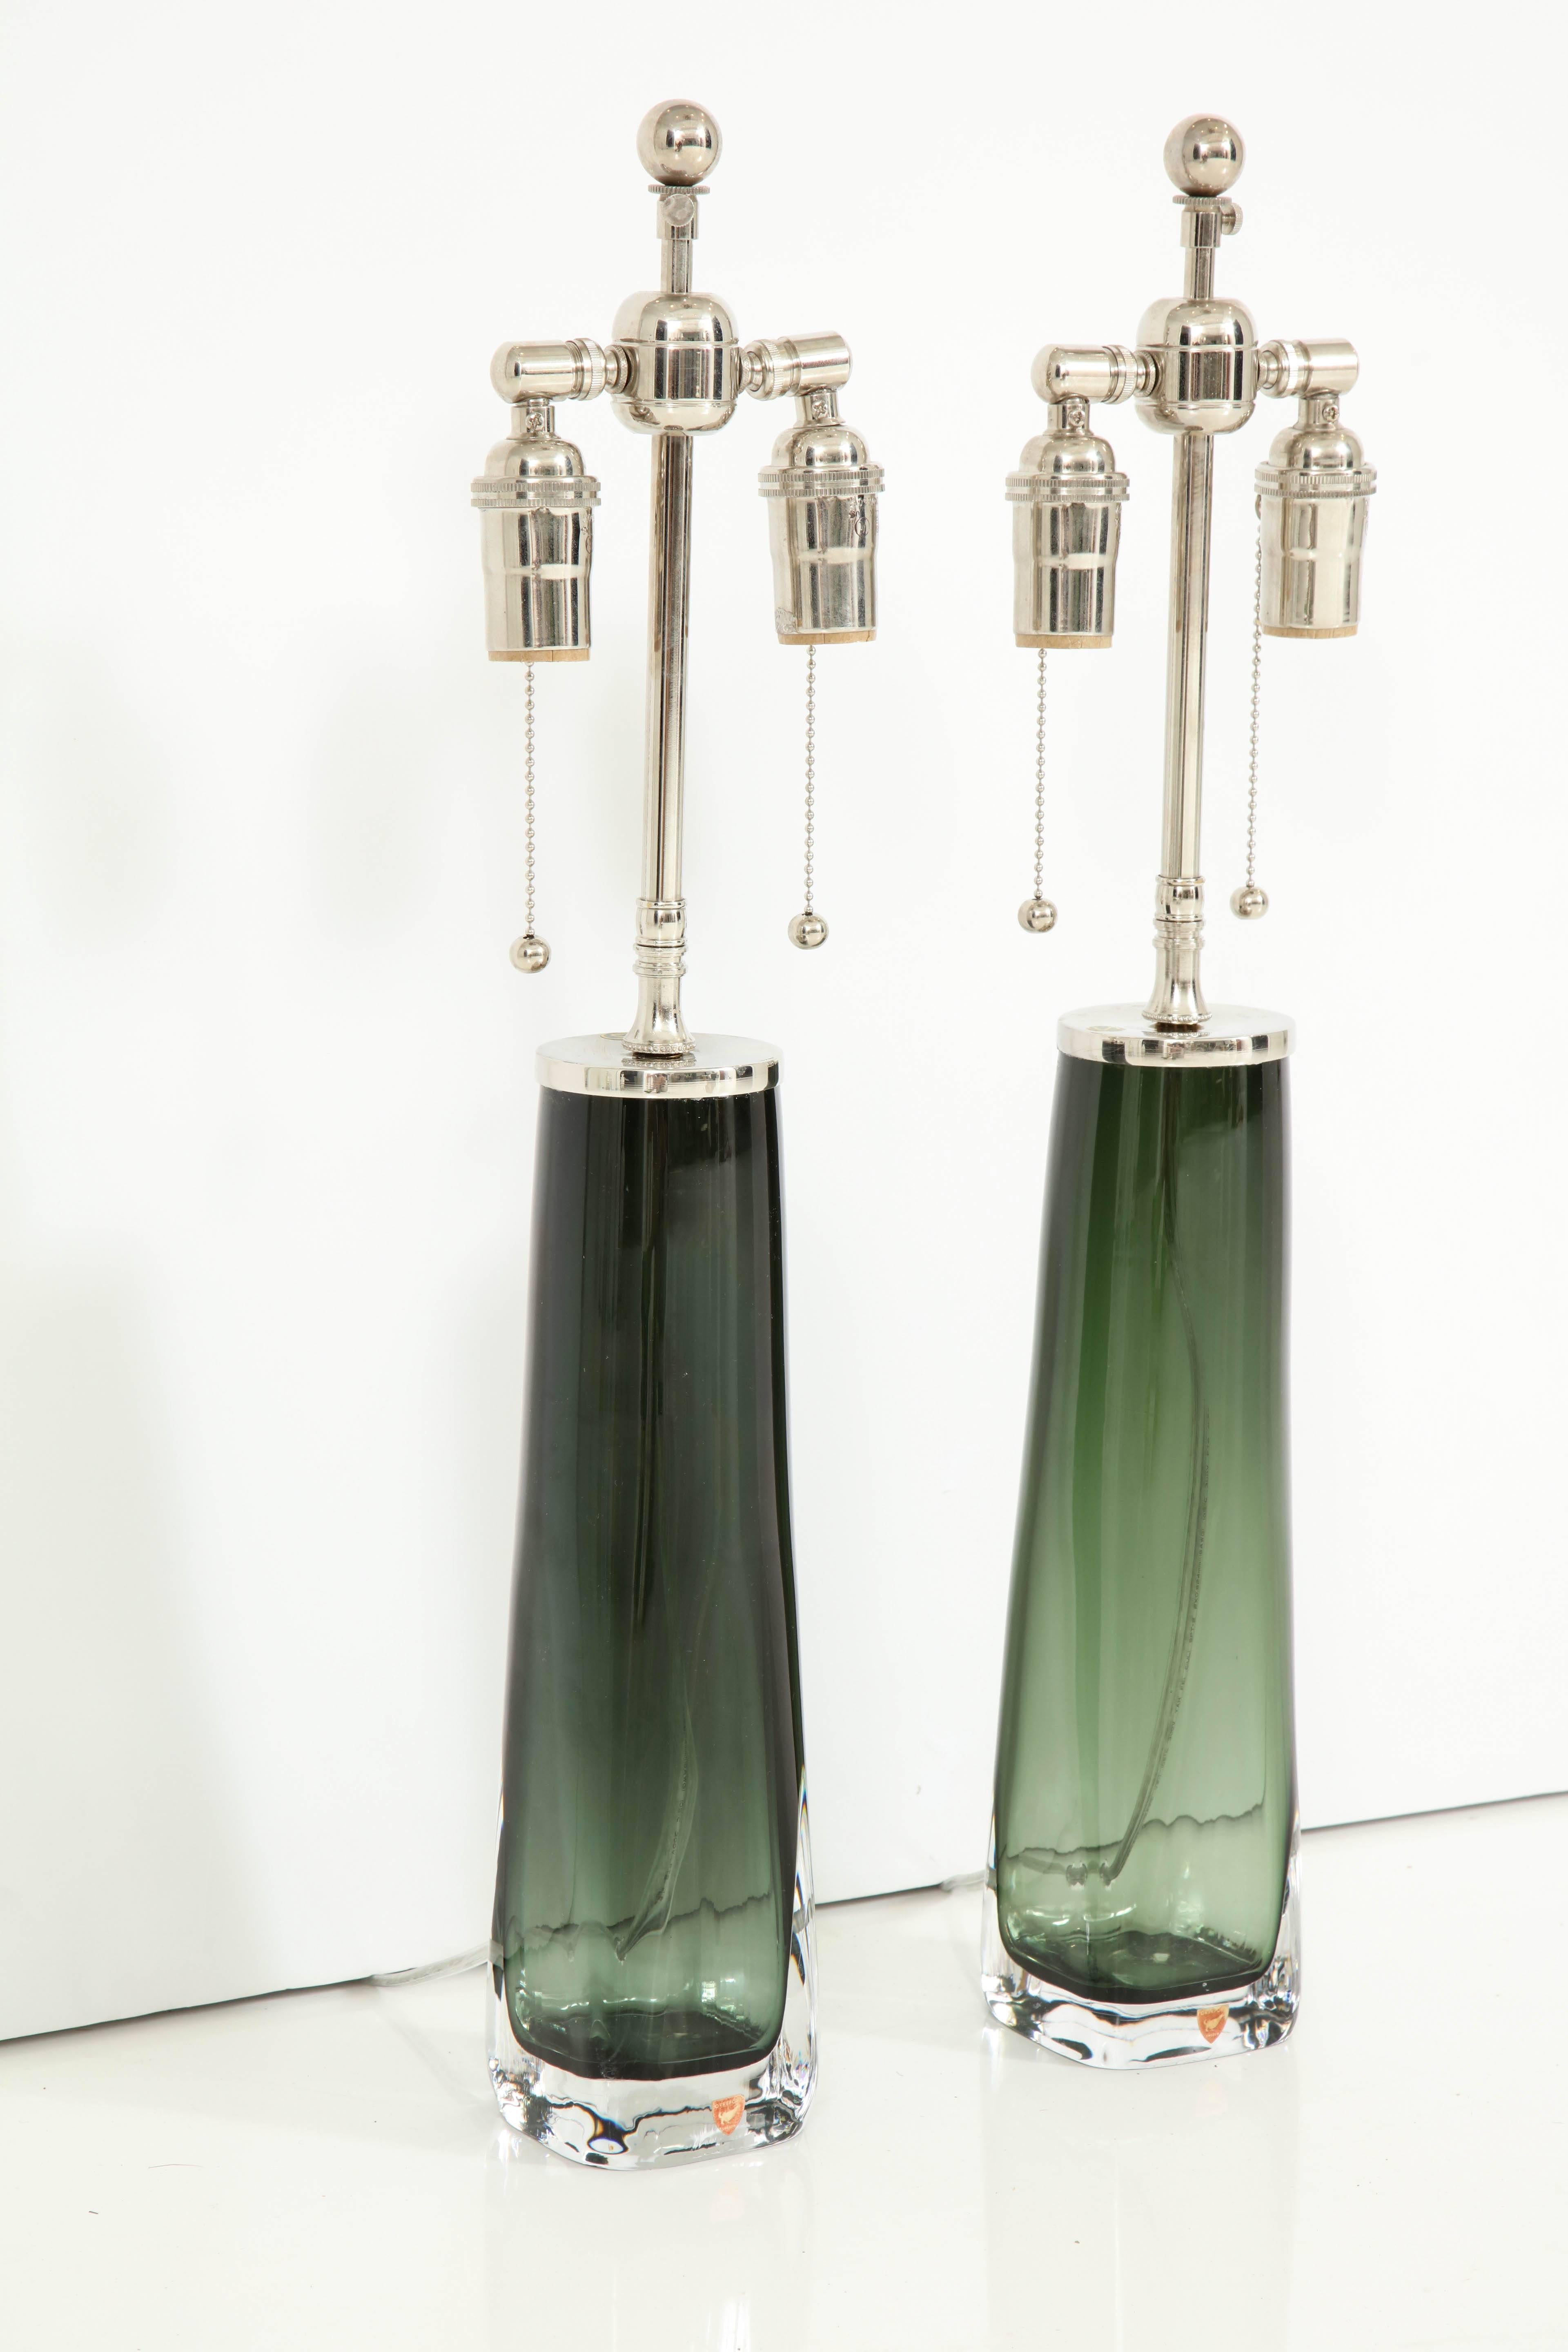 Stunning pair of forest green crystal lamps by Orrefors.
The lamps have been newly rewired for the US with adjustable nickel double clusters that take standard light bulbs.